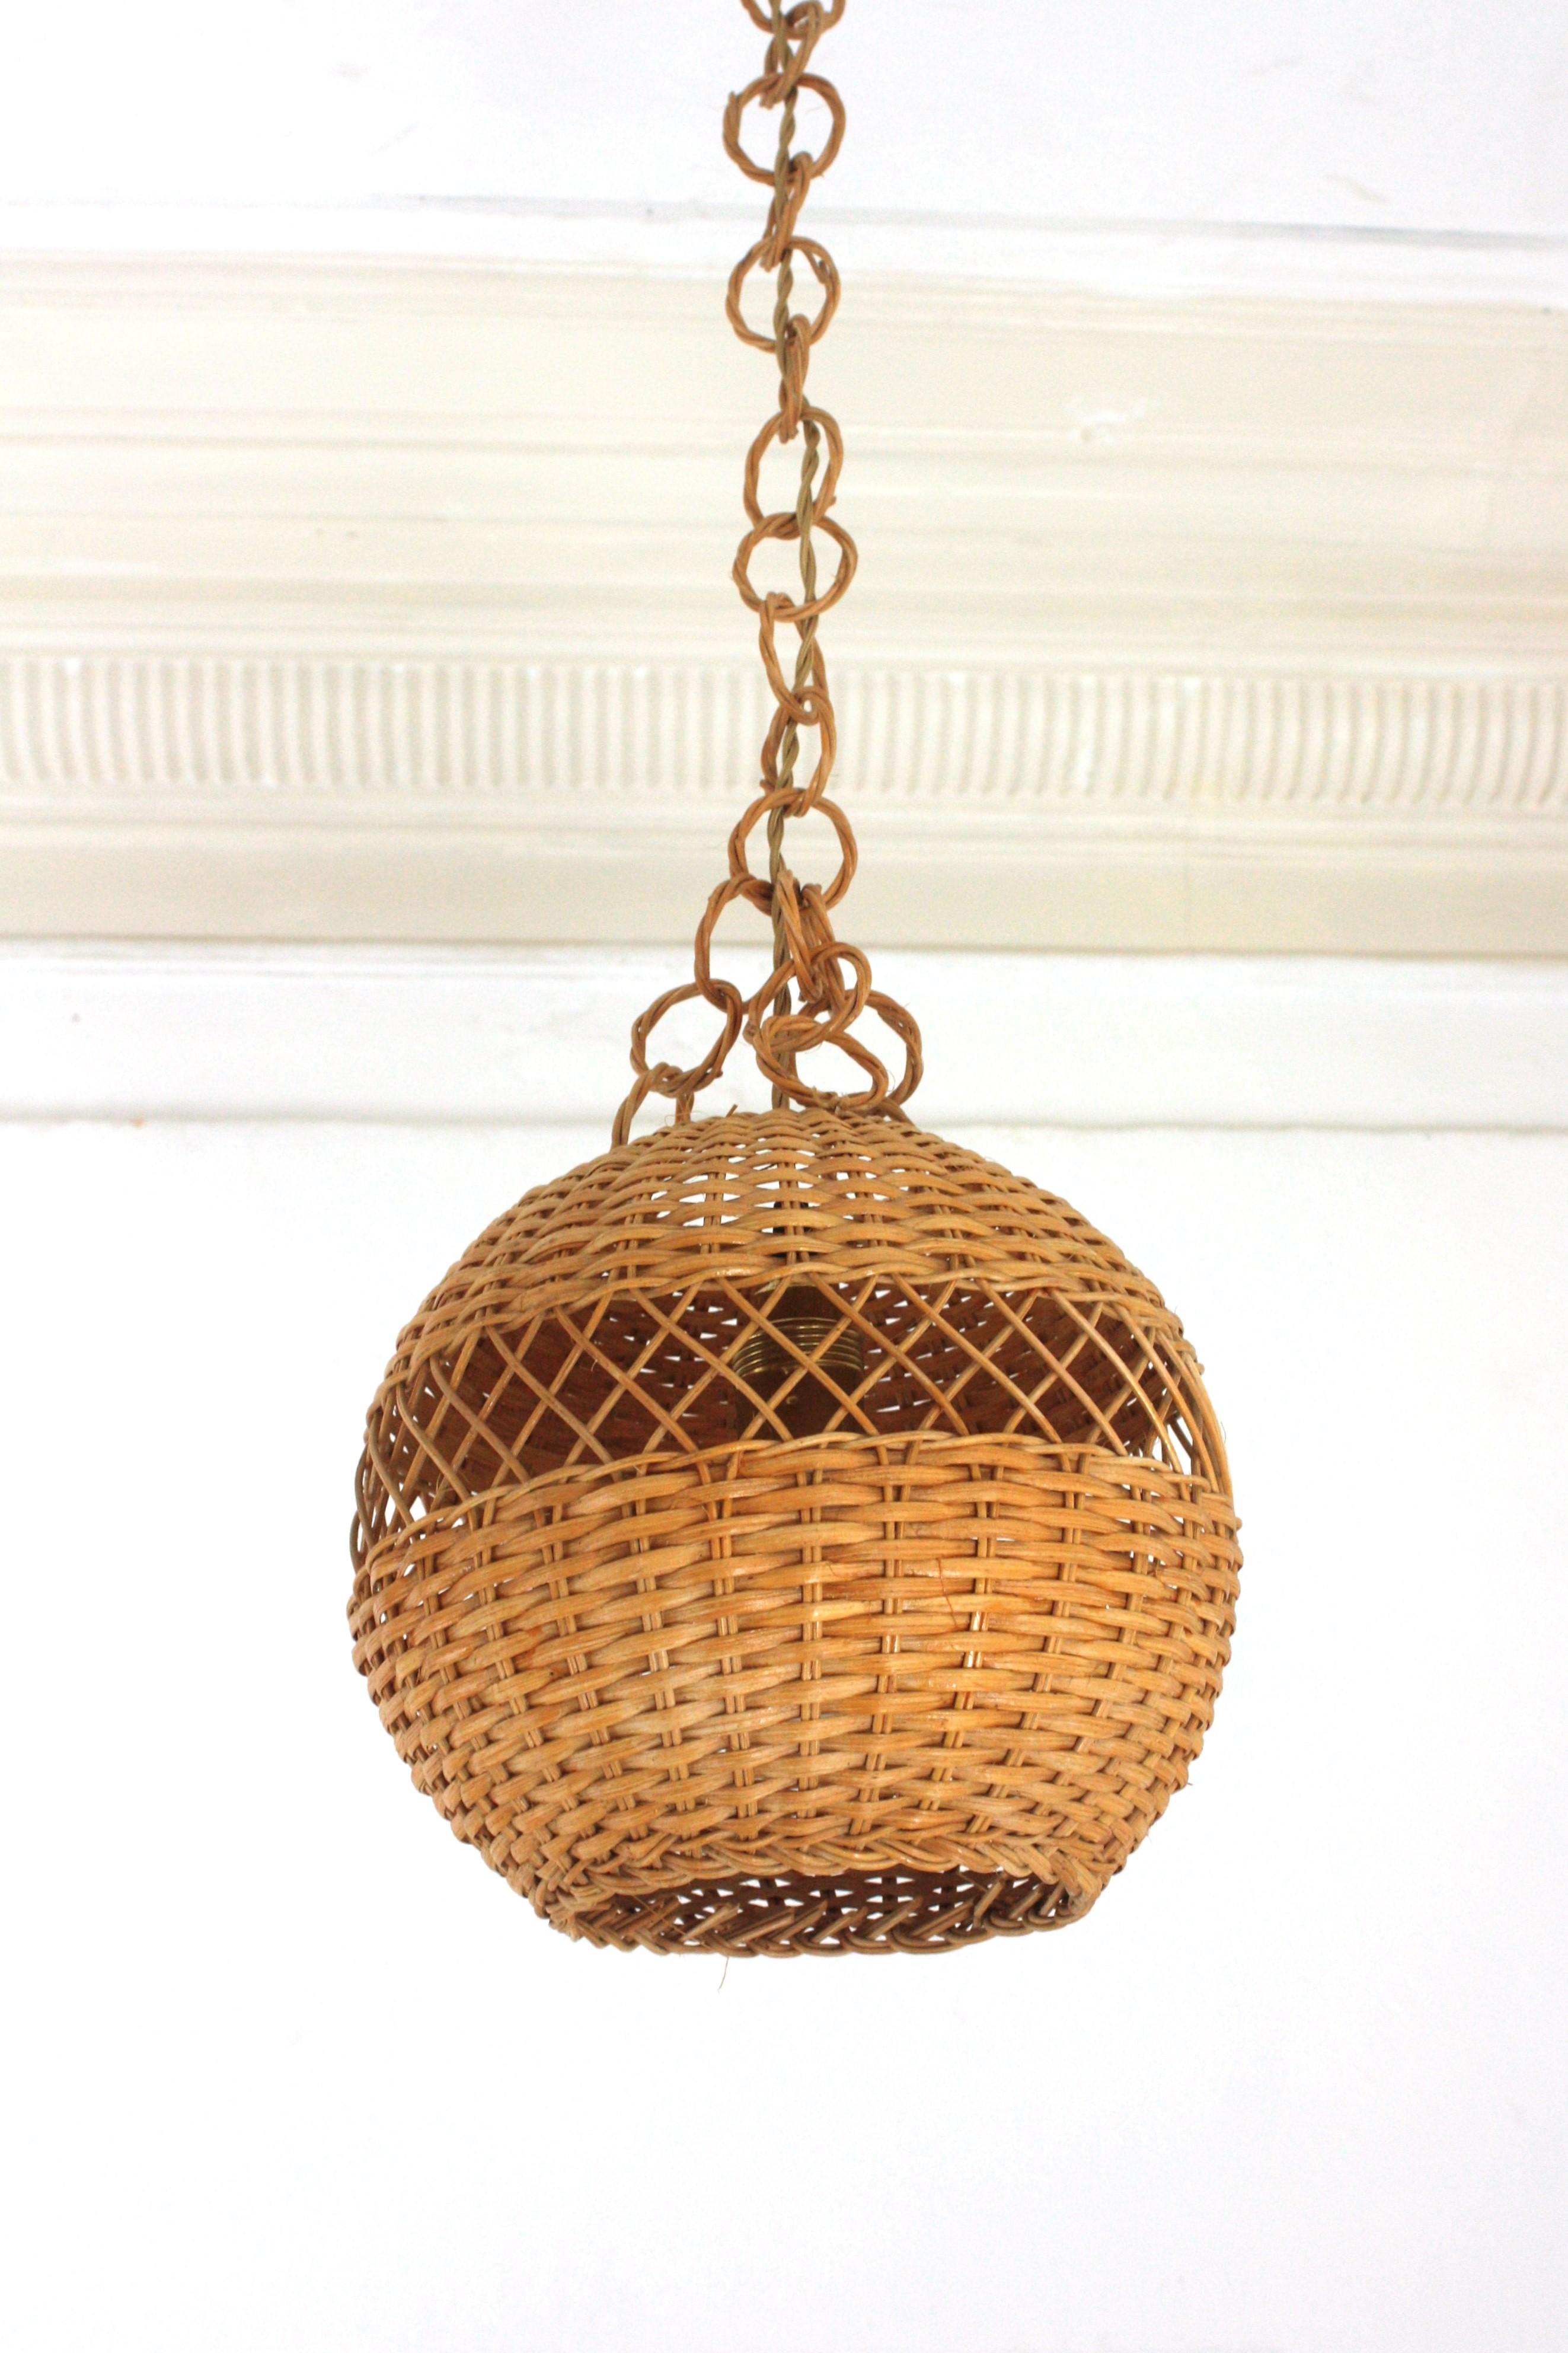 Pair of Handwoven Wicker Globe Pendant Lights or Lanterns For Sale 1